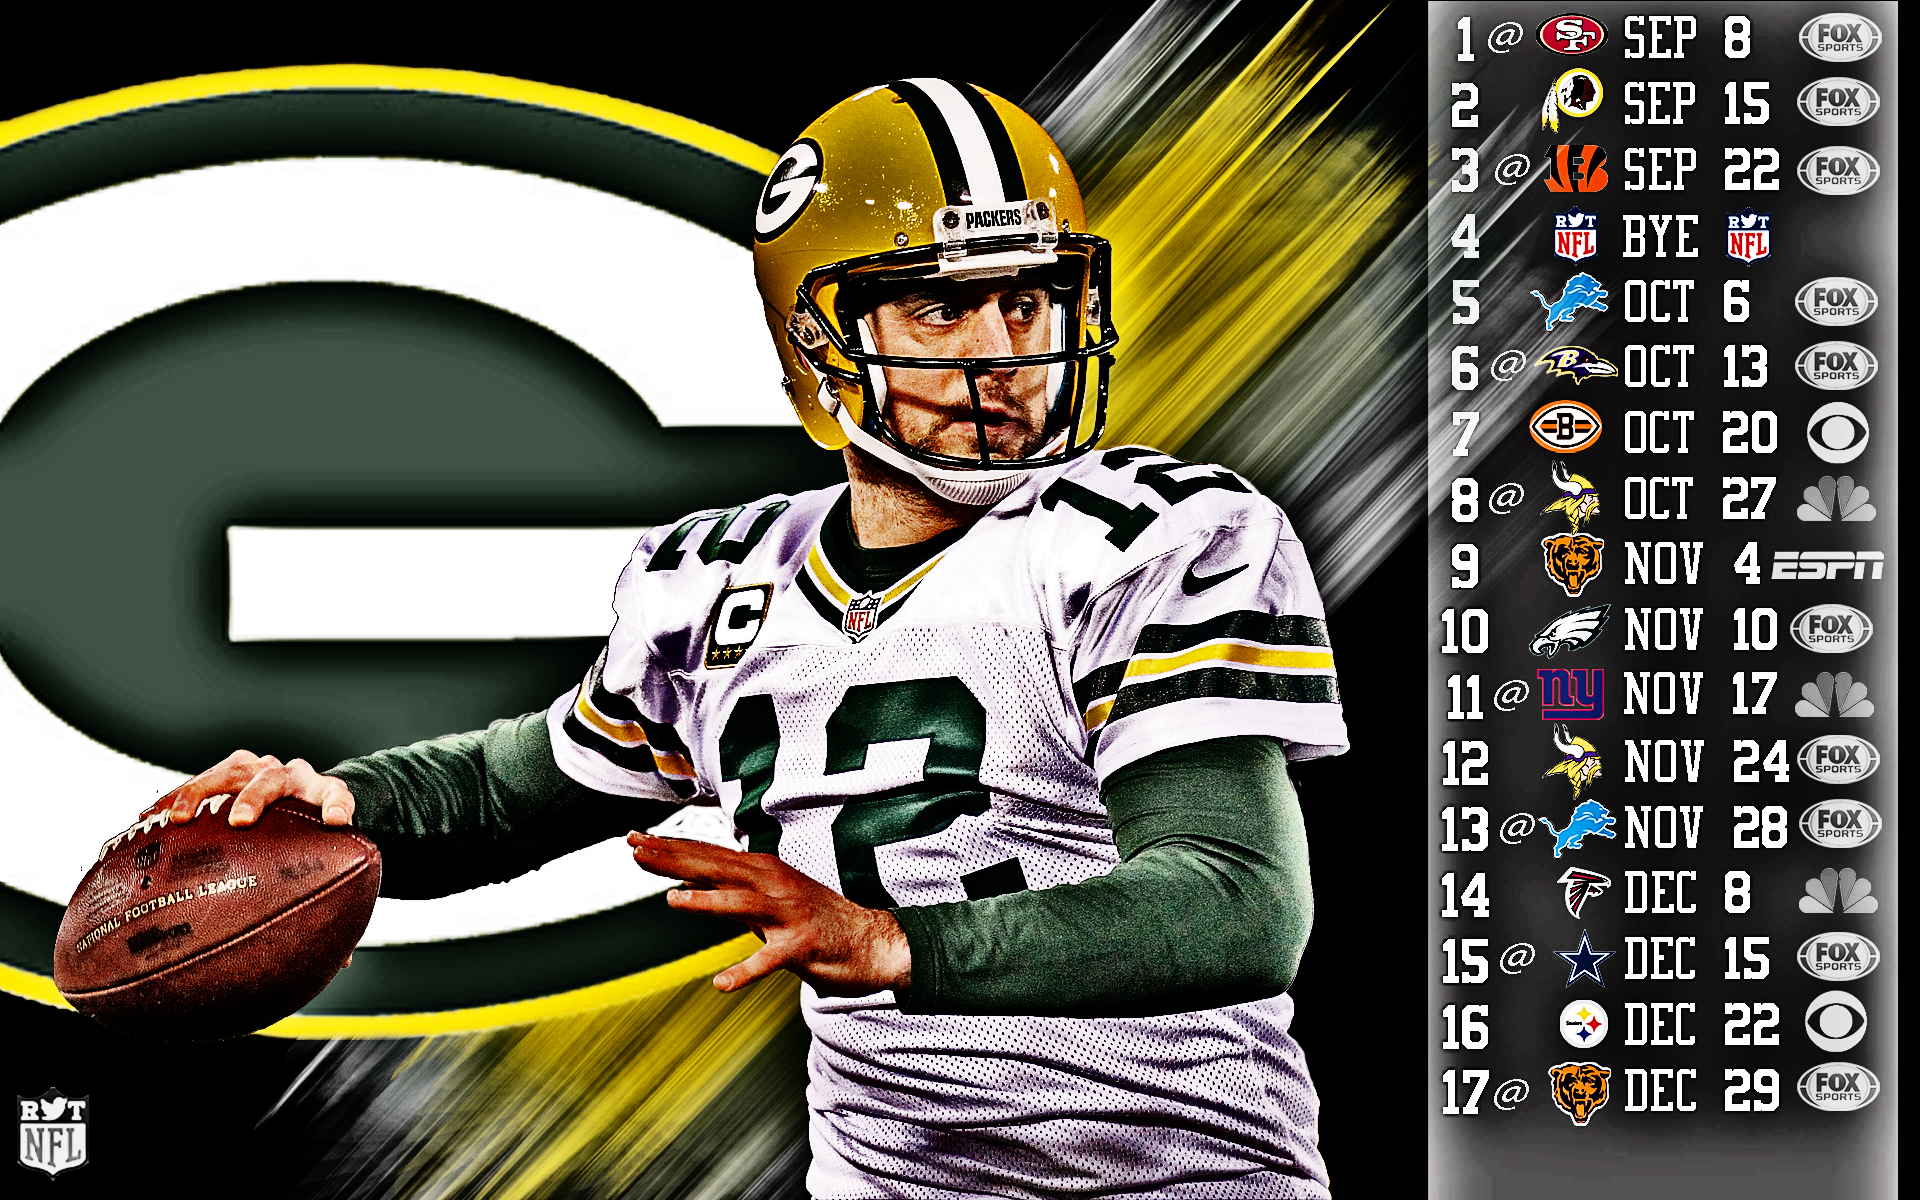 Aaron Rodgers 2013 Packers Schedule Wallpaper HDR Sports